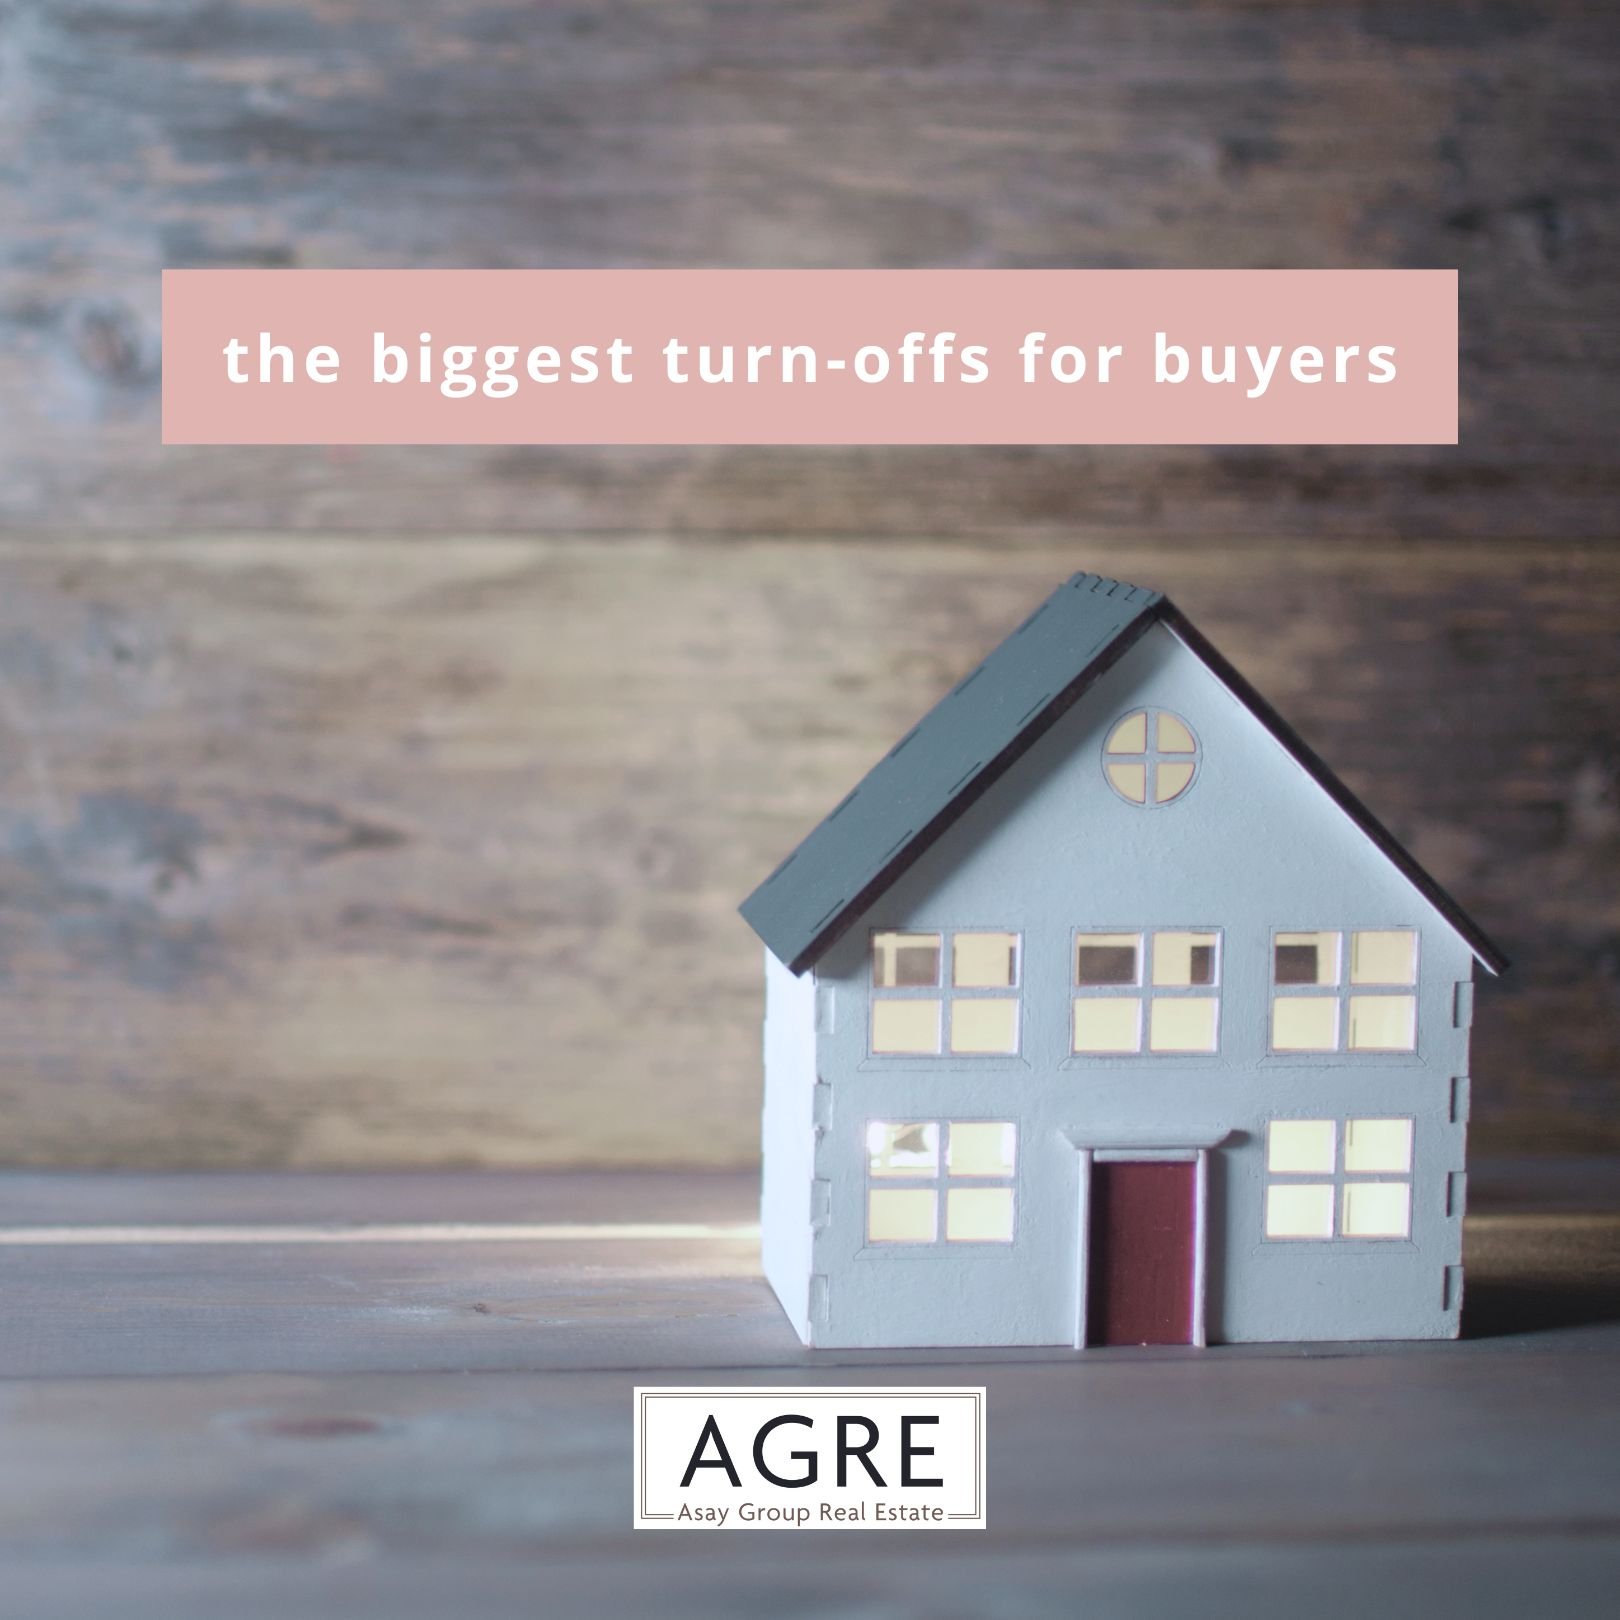 Buyers have more options when it comes to choosing a home than they did a year ago. Carefully pricing and staging your home is one of the best ways to stand out among the competition. Here are a few of the top turn-offs for prospective buyers.
🗸 Ove